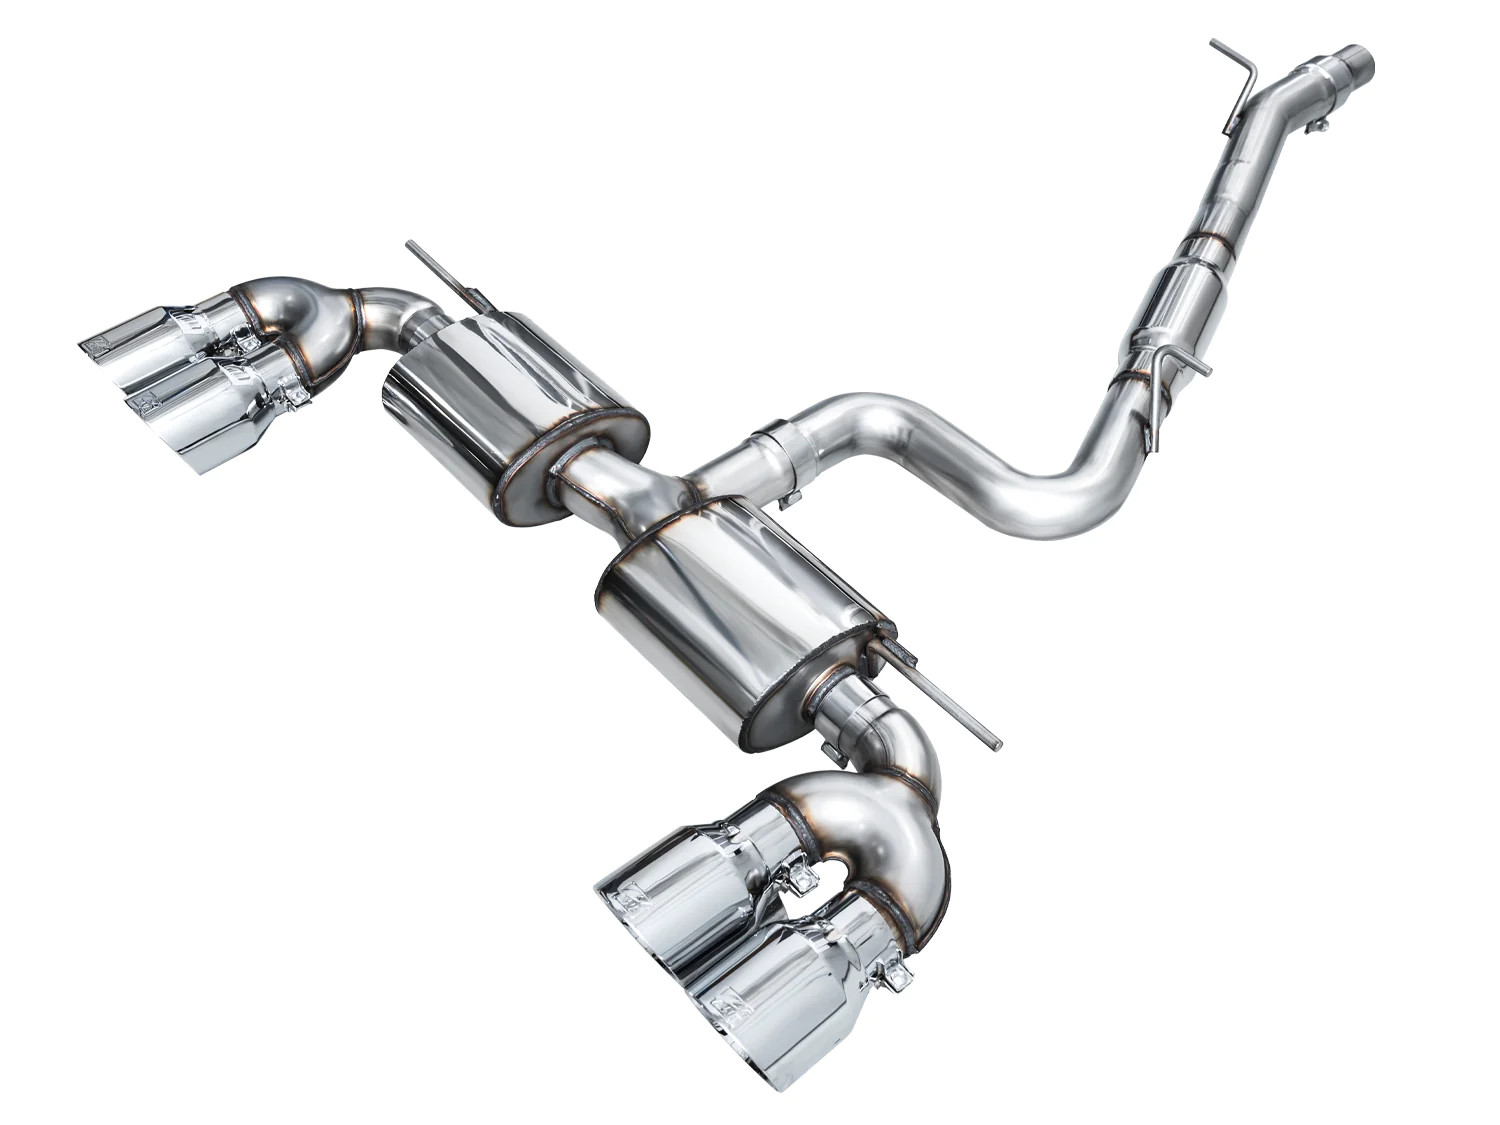 AWE MK8 Volkswagen Golf R Touring Edition Exhaust - Chrome Silver Tips - 3015-42658